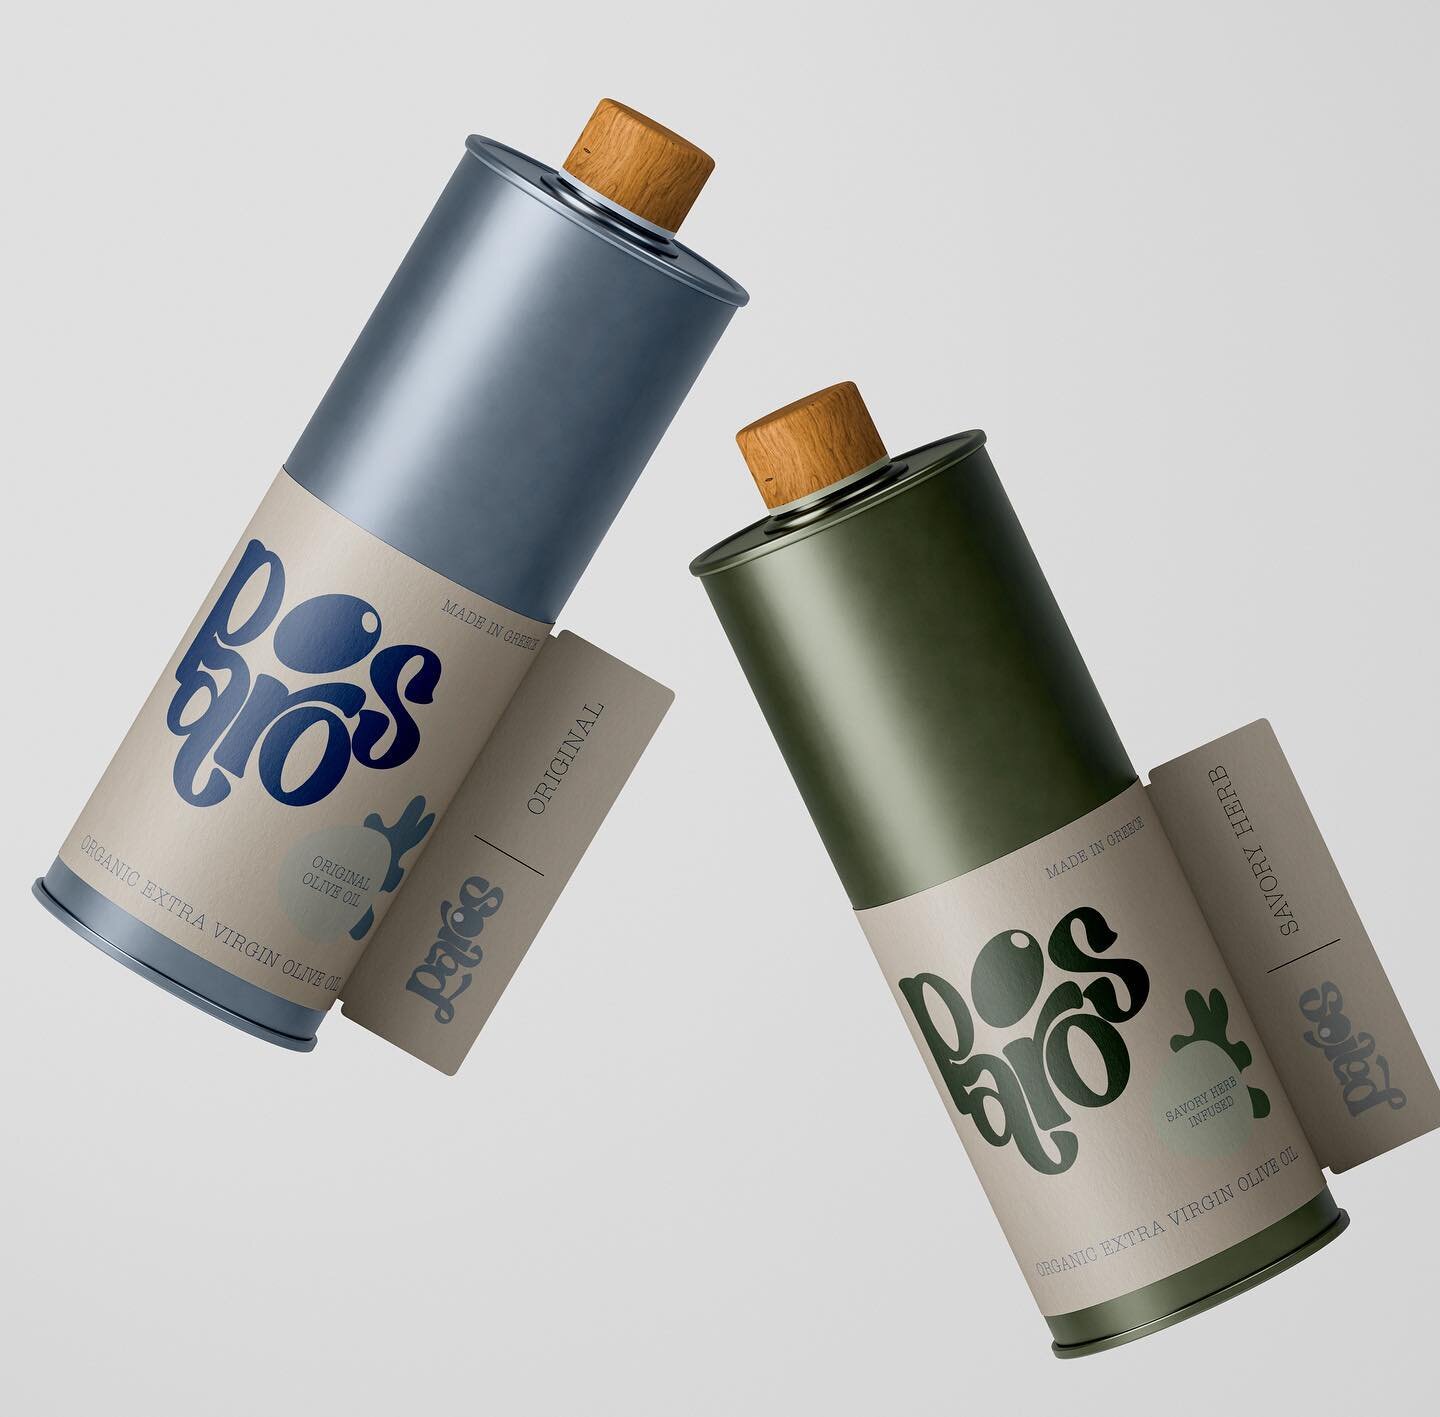 Introducing Paros olive oil of Greece! 

Olive oil is one of my main food groups so I loved working on this branding. How cool are these tin bottles?! 

#brandbriefparos @brand.brief #brandidentity #branding #graphicdesign #graphicdesigner #logo #log